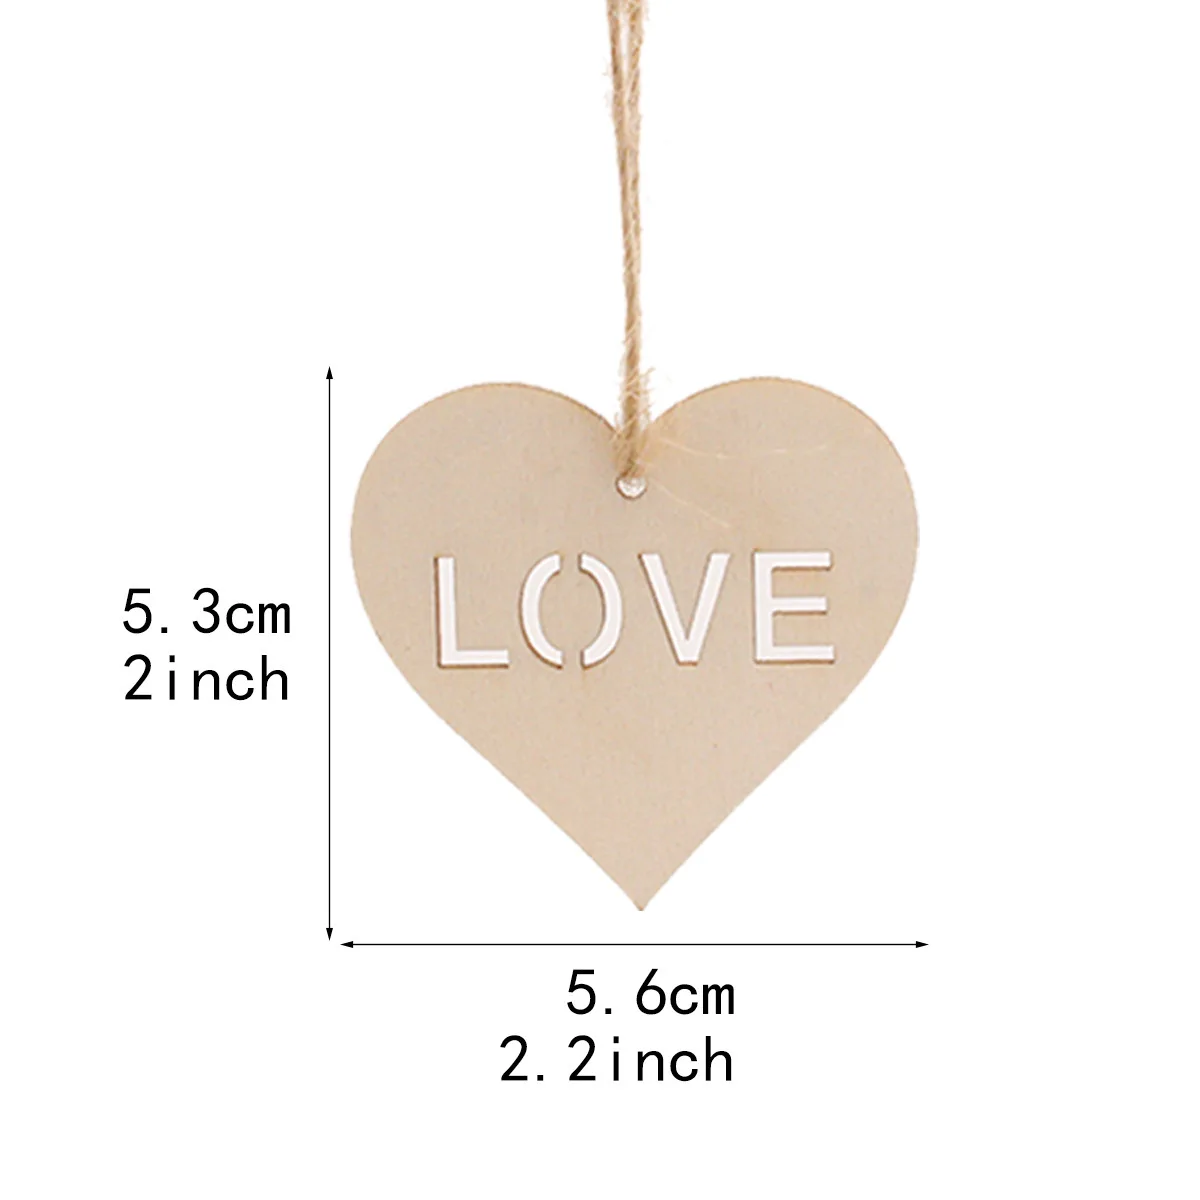 100 Pieces Christmas ornaments Wood Heart Tags Hanging Craft DIY Home Decorations  Wind Chimes Hanging Tags Wedding Decoration